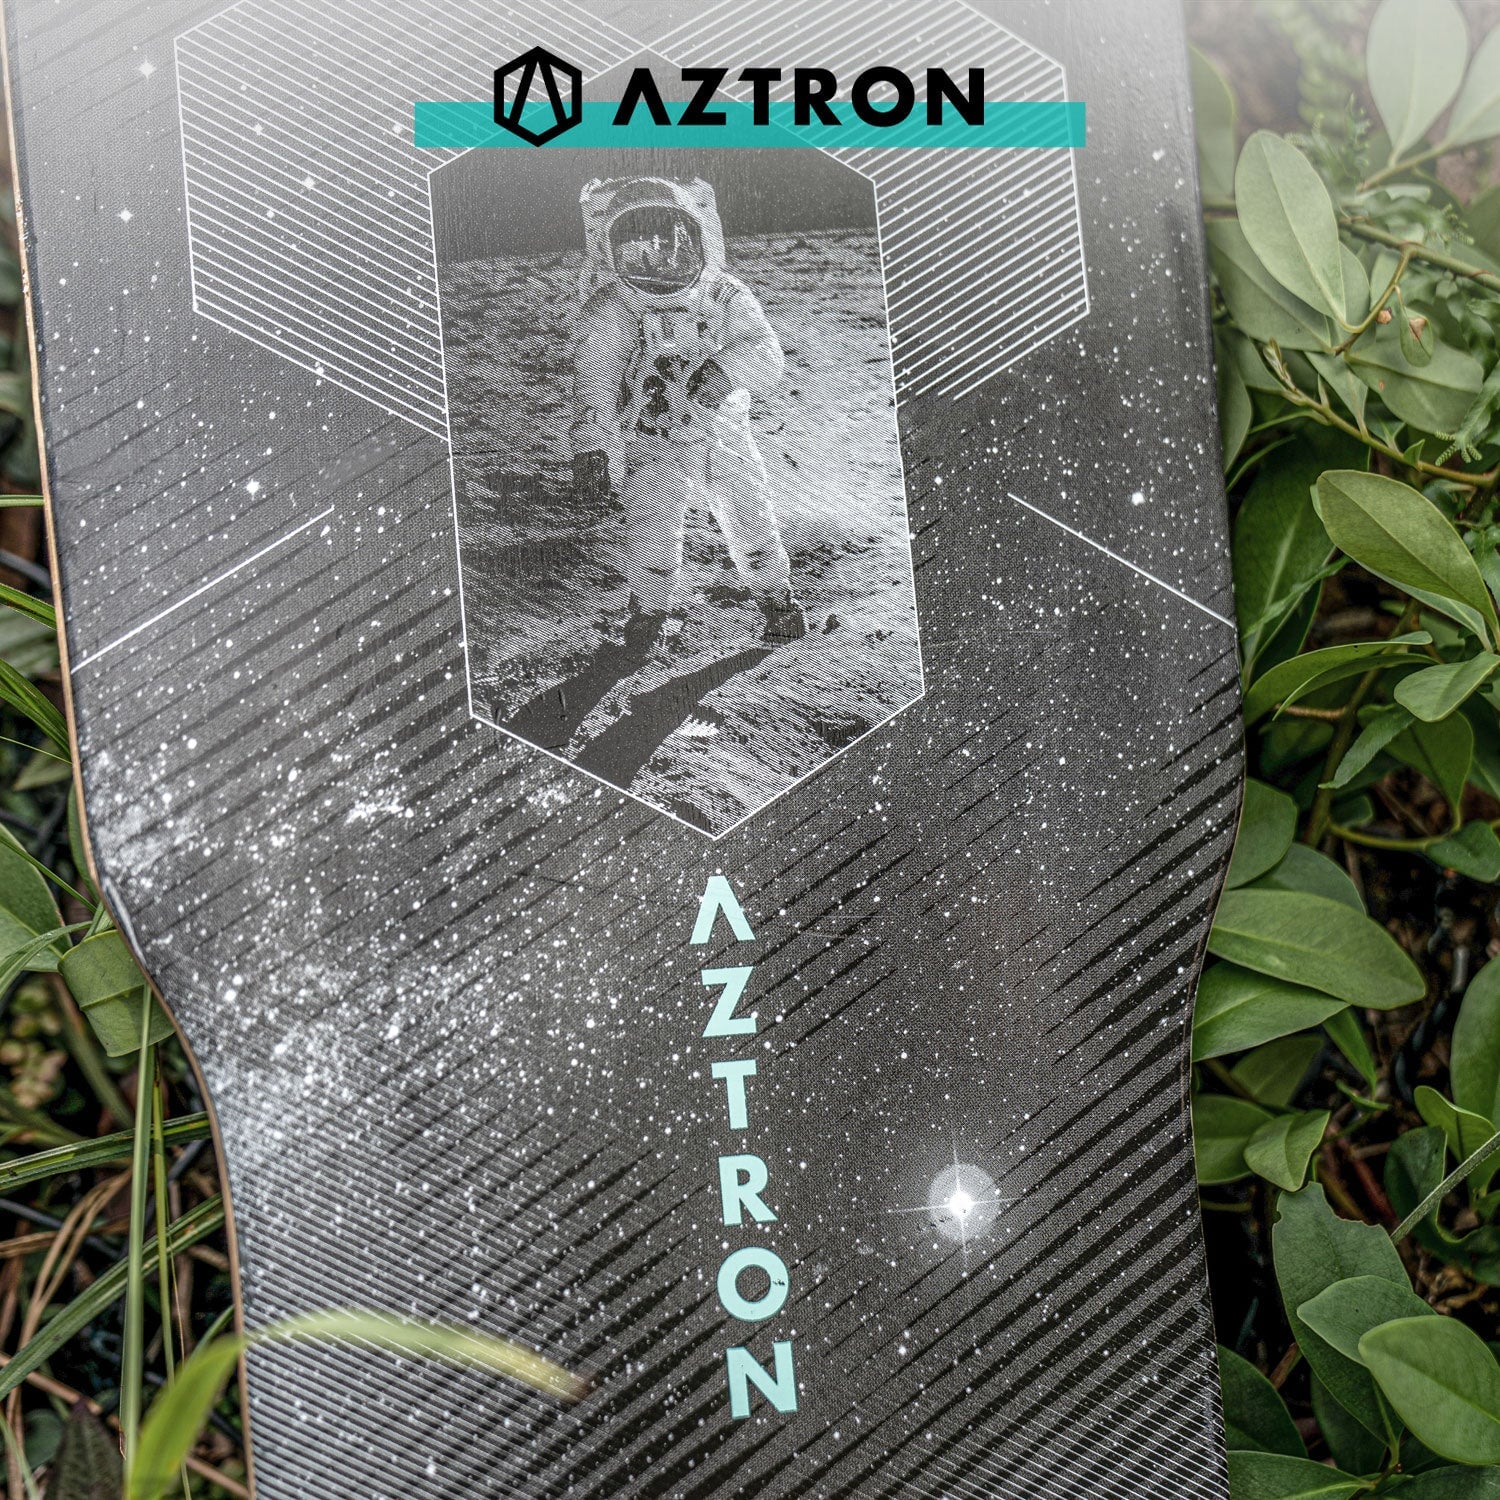 Aztron SPACE 40 Surfskate Board